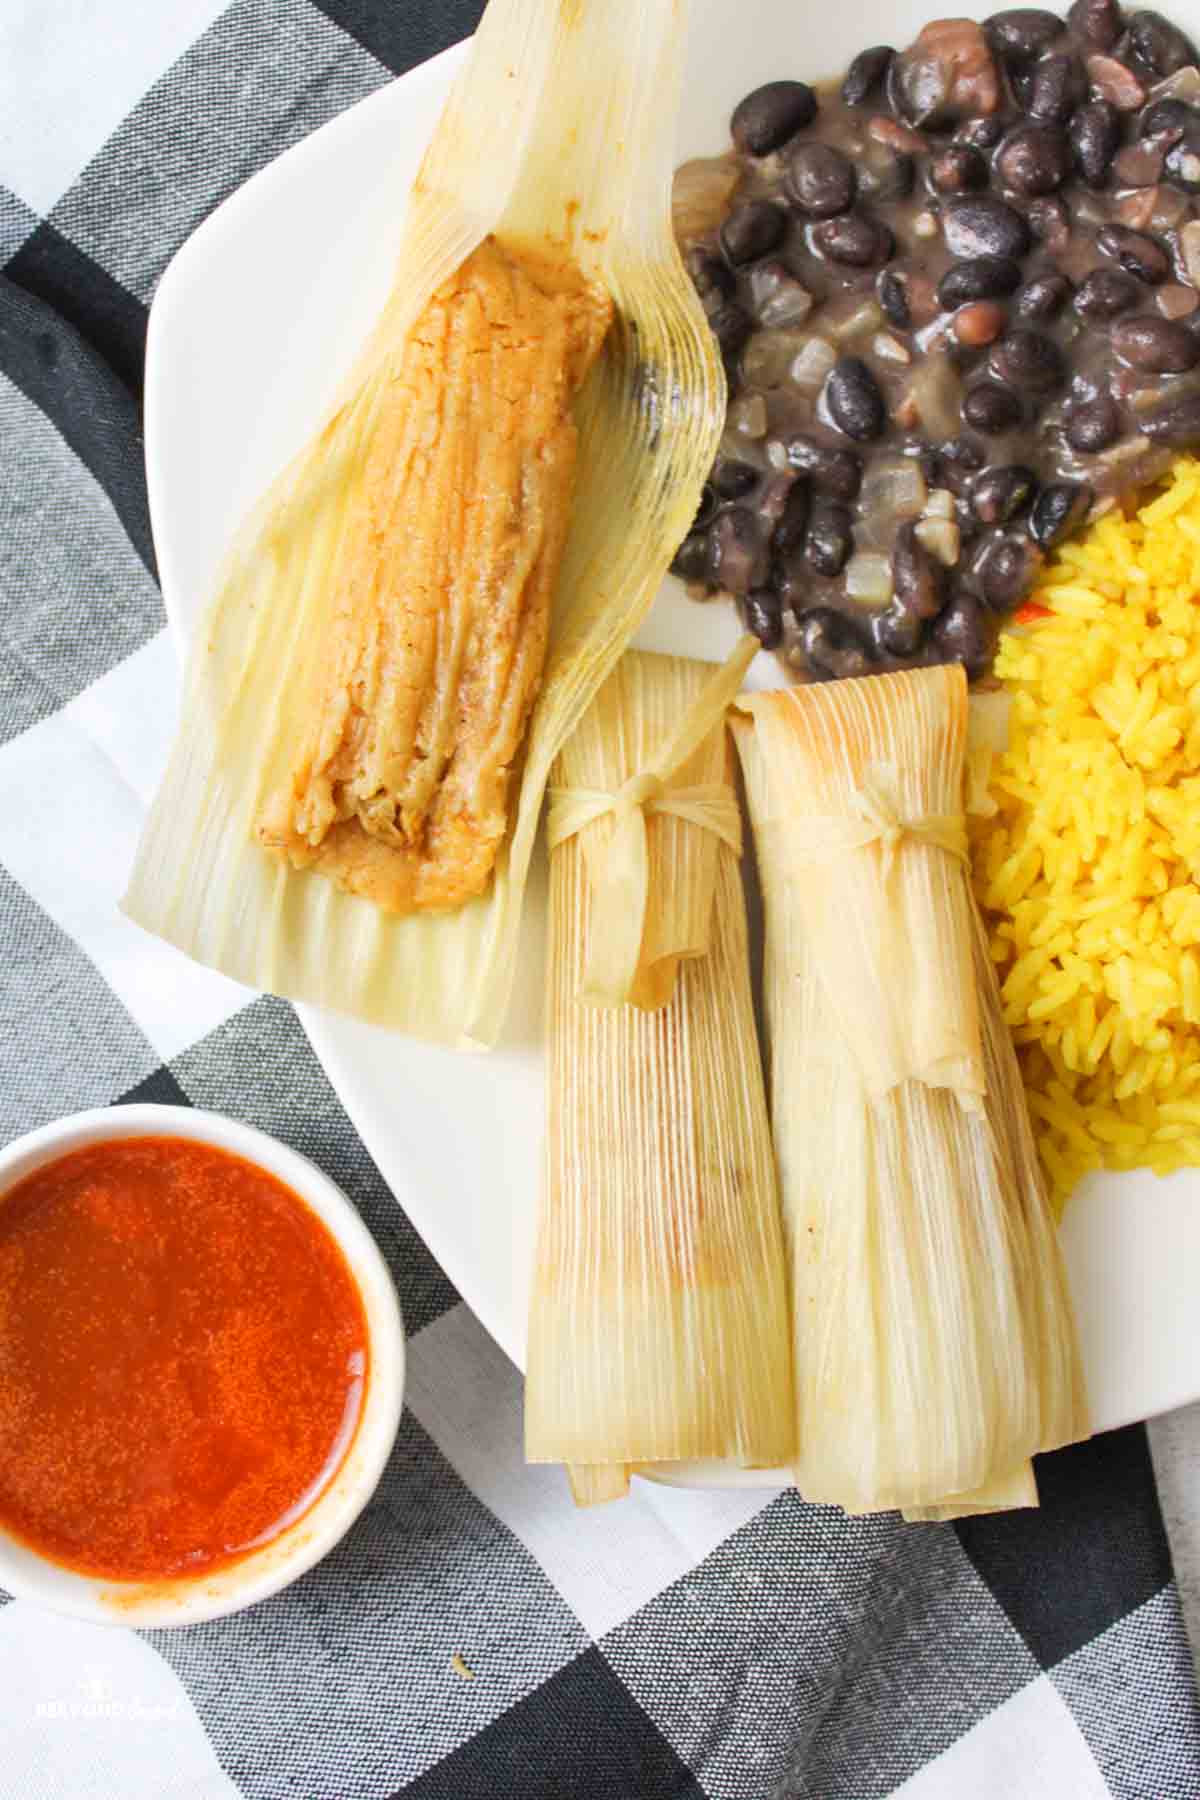 three turkey tamales on a plate with side dishes one tamale is opened to revel the doughy inside